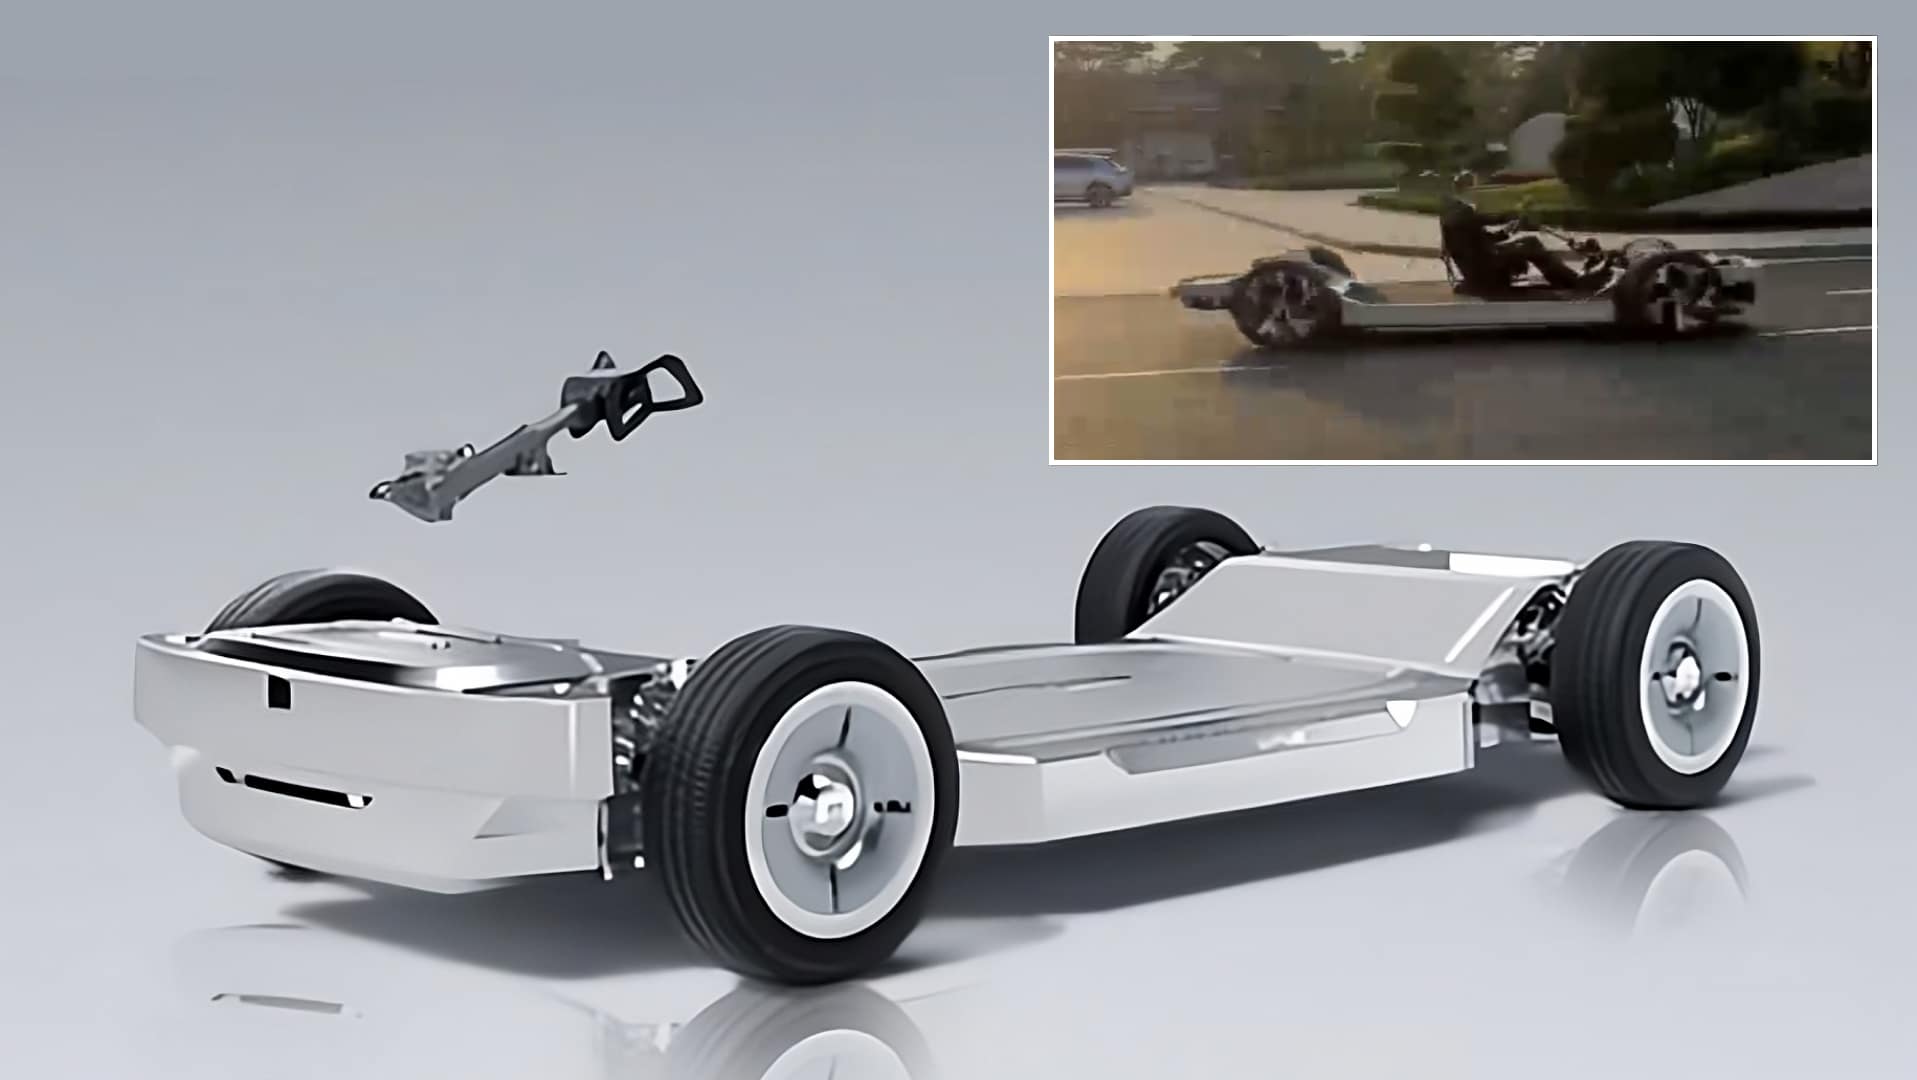 CATL’s CIIC skateboard chassis drives without body installed. Huawei might be the first customer